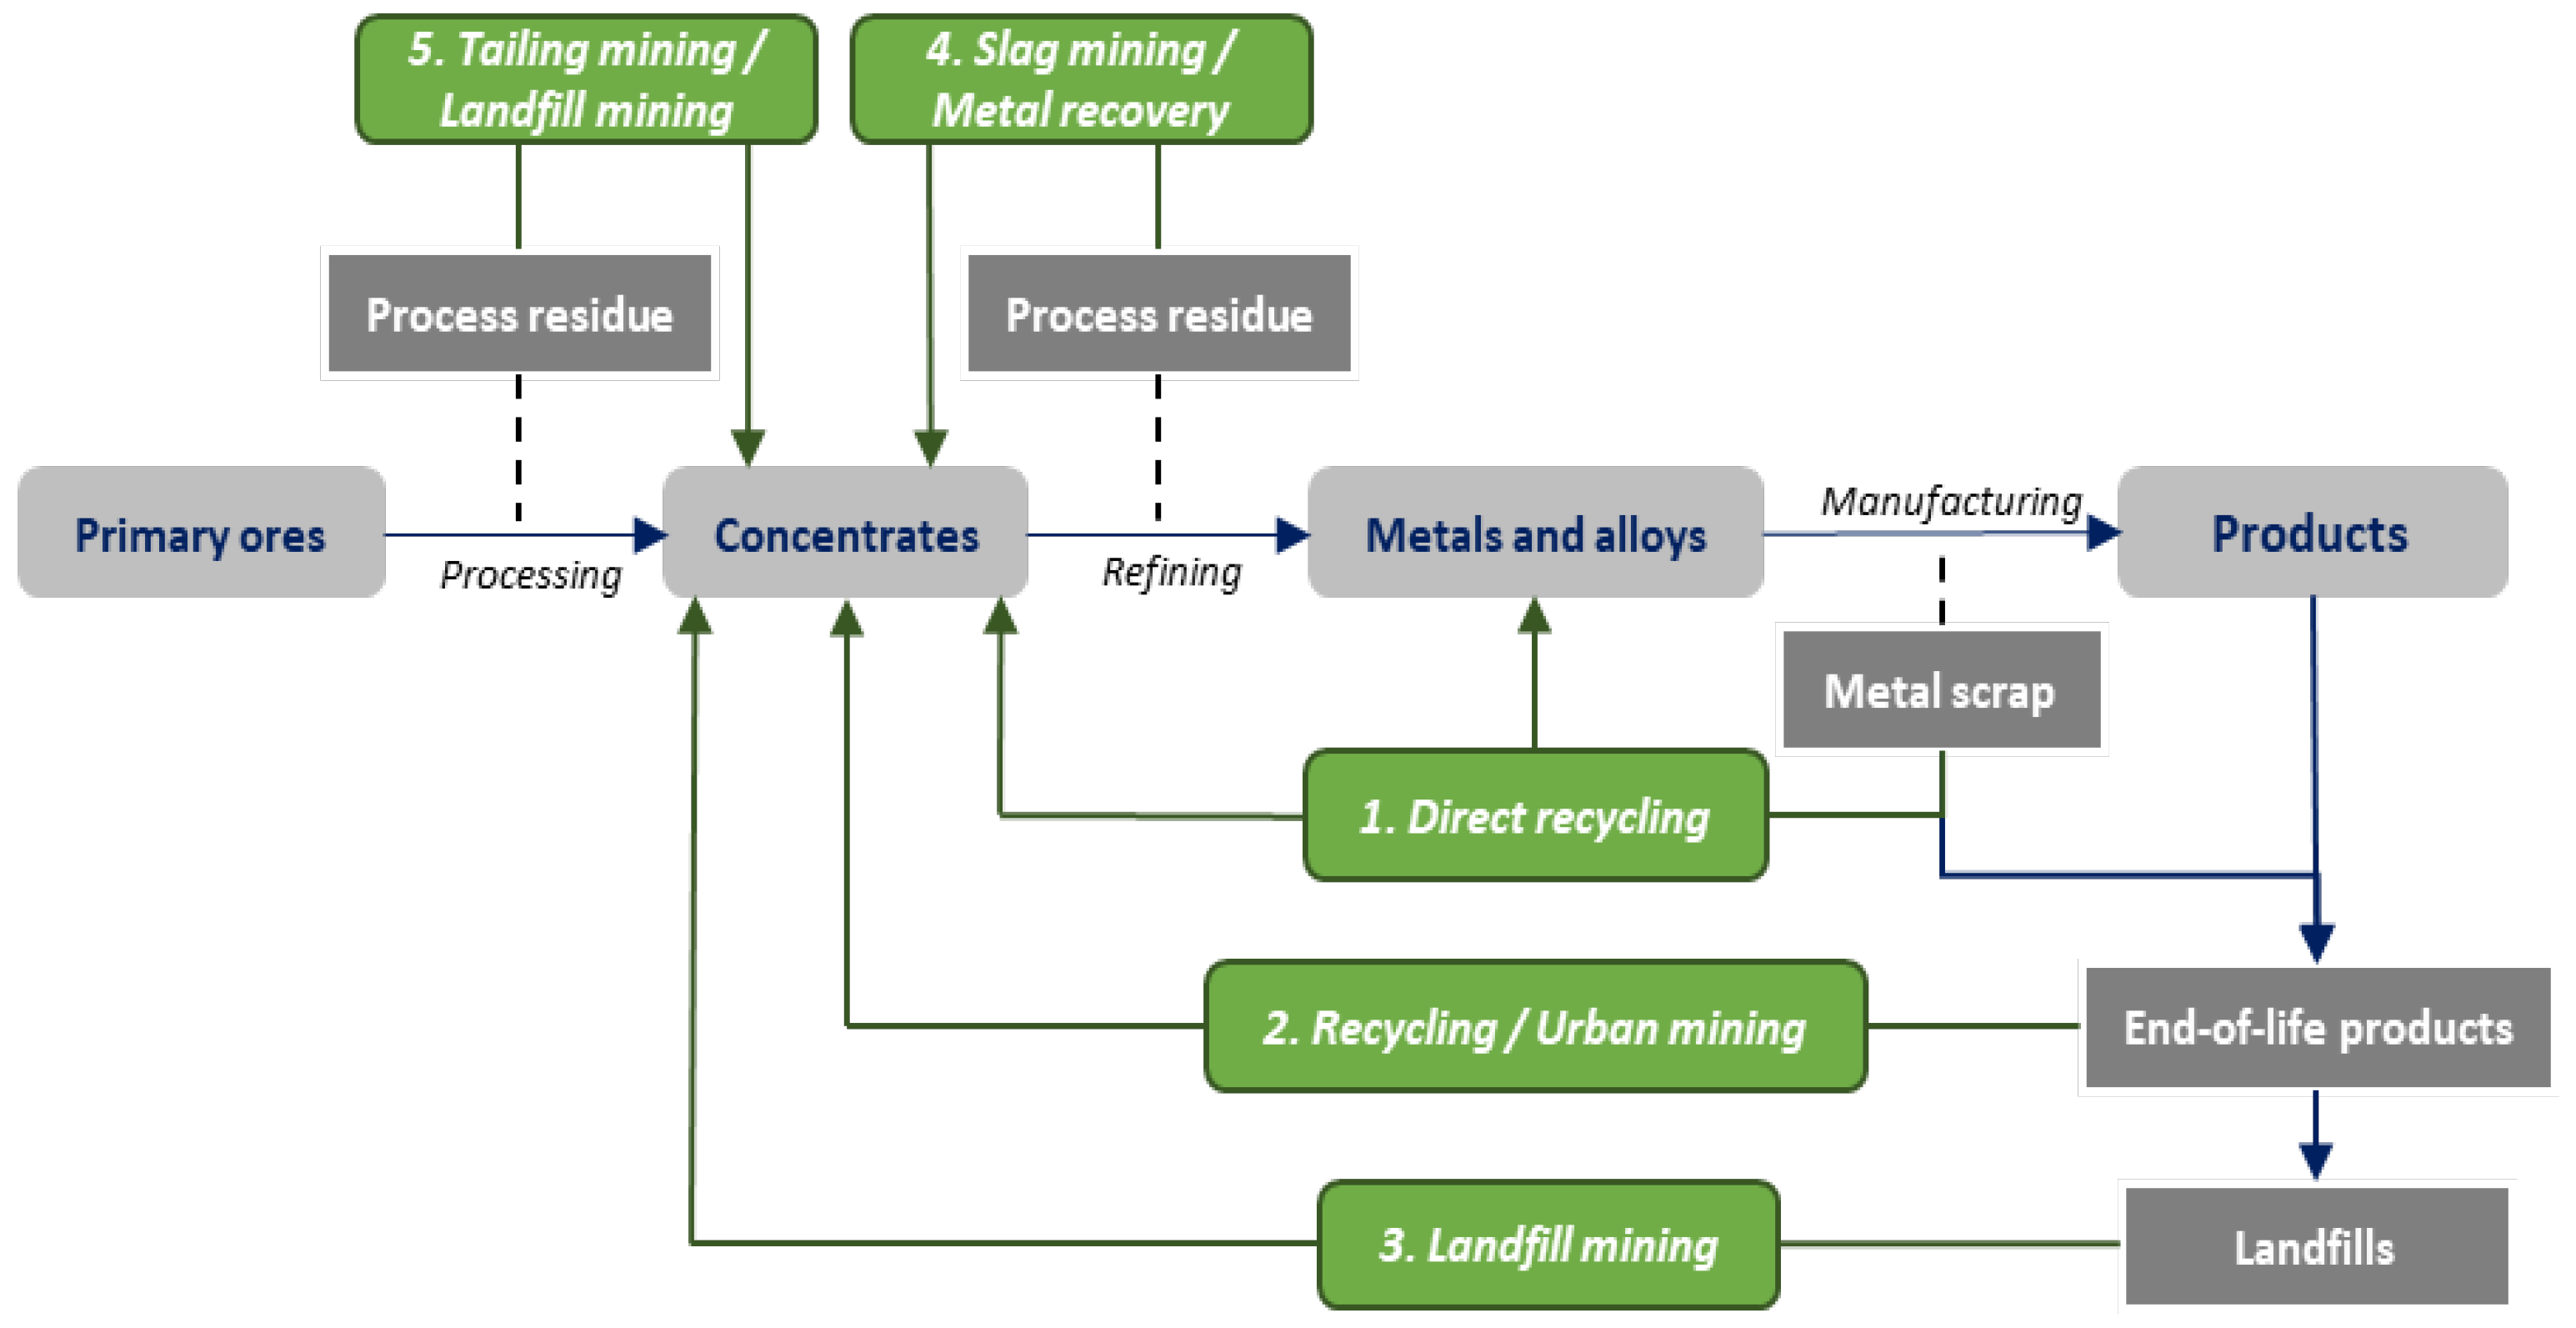 Critical Mineral Recovery™ - A Global Battery Recycling Company